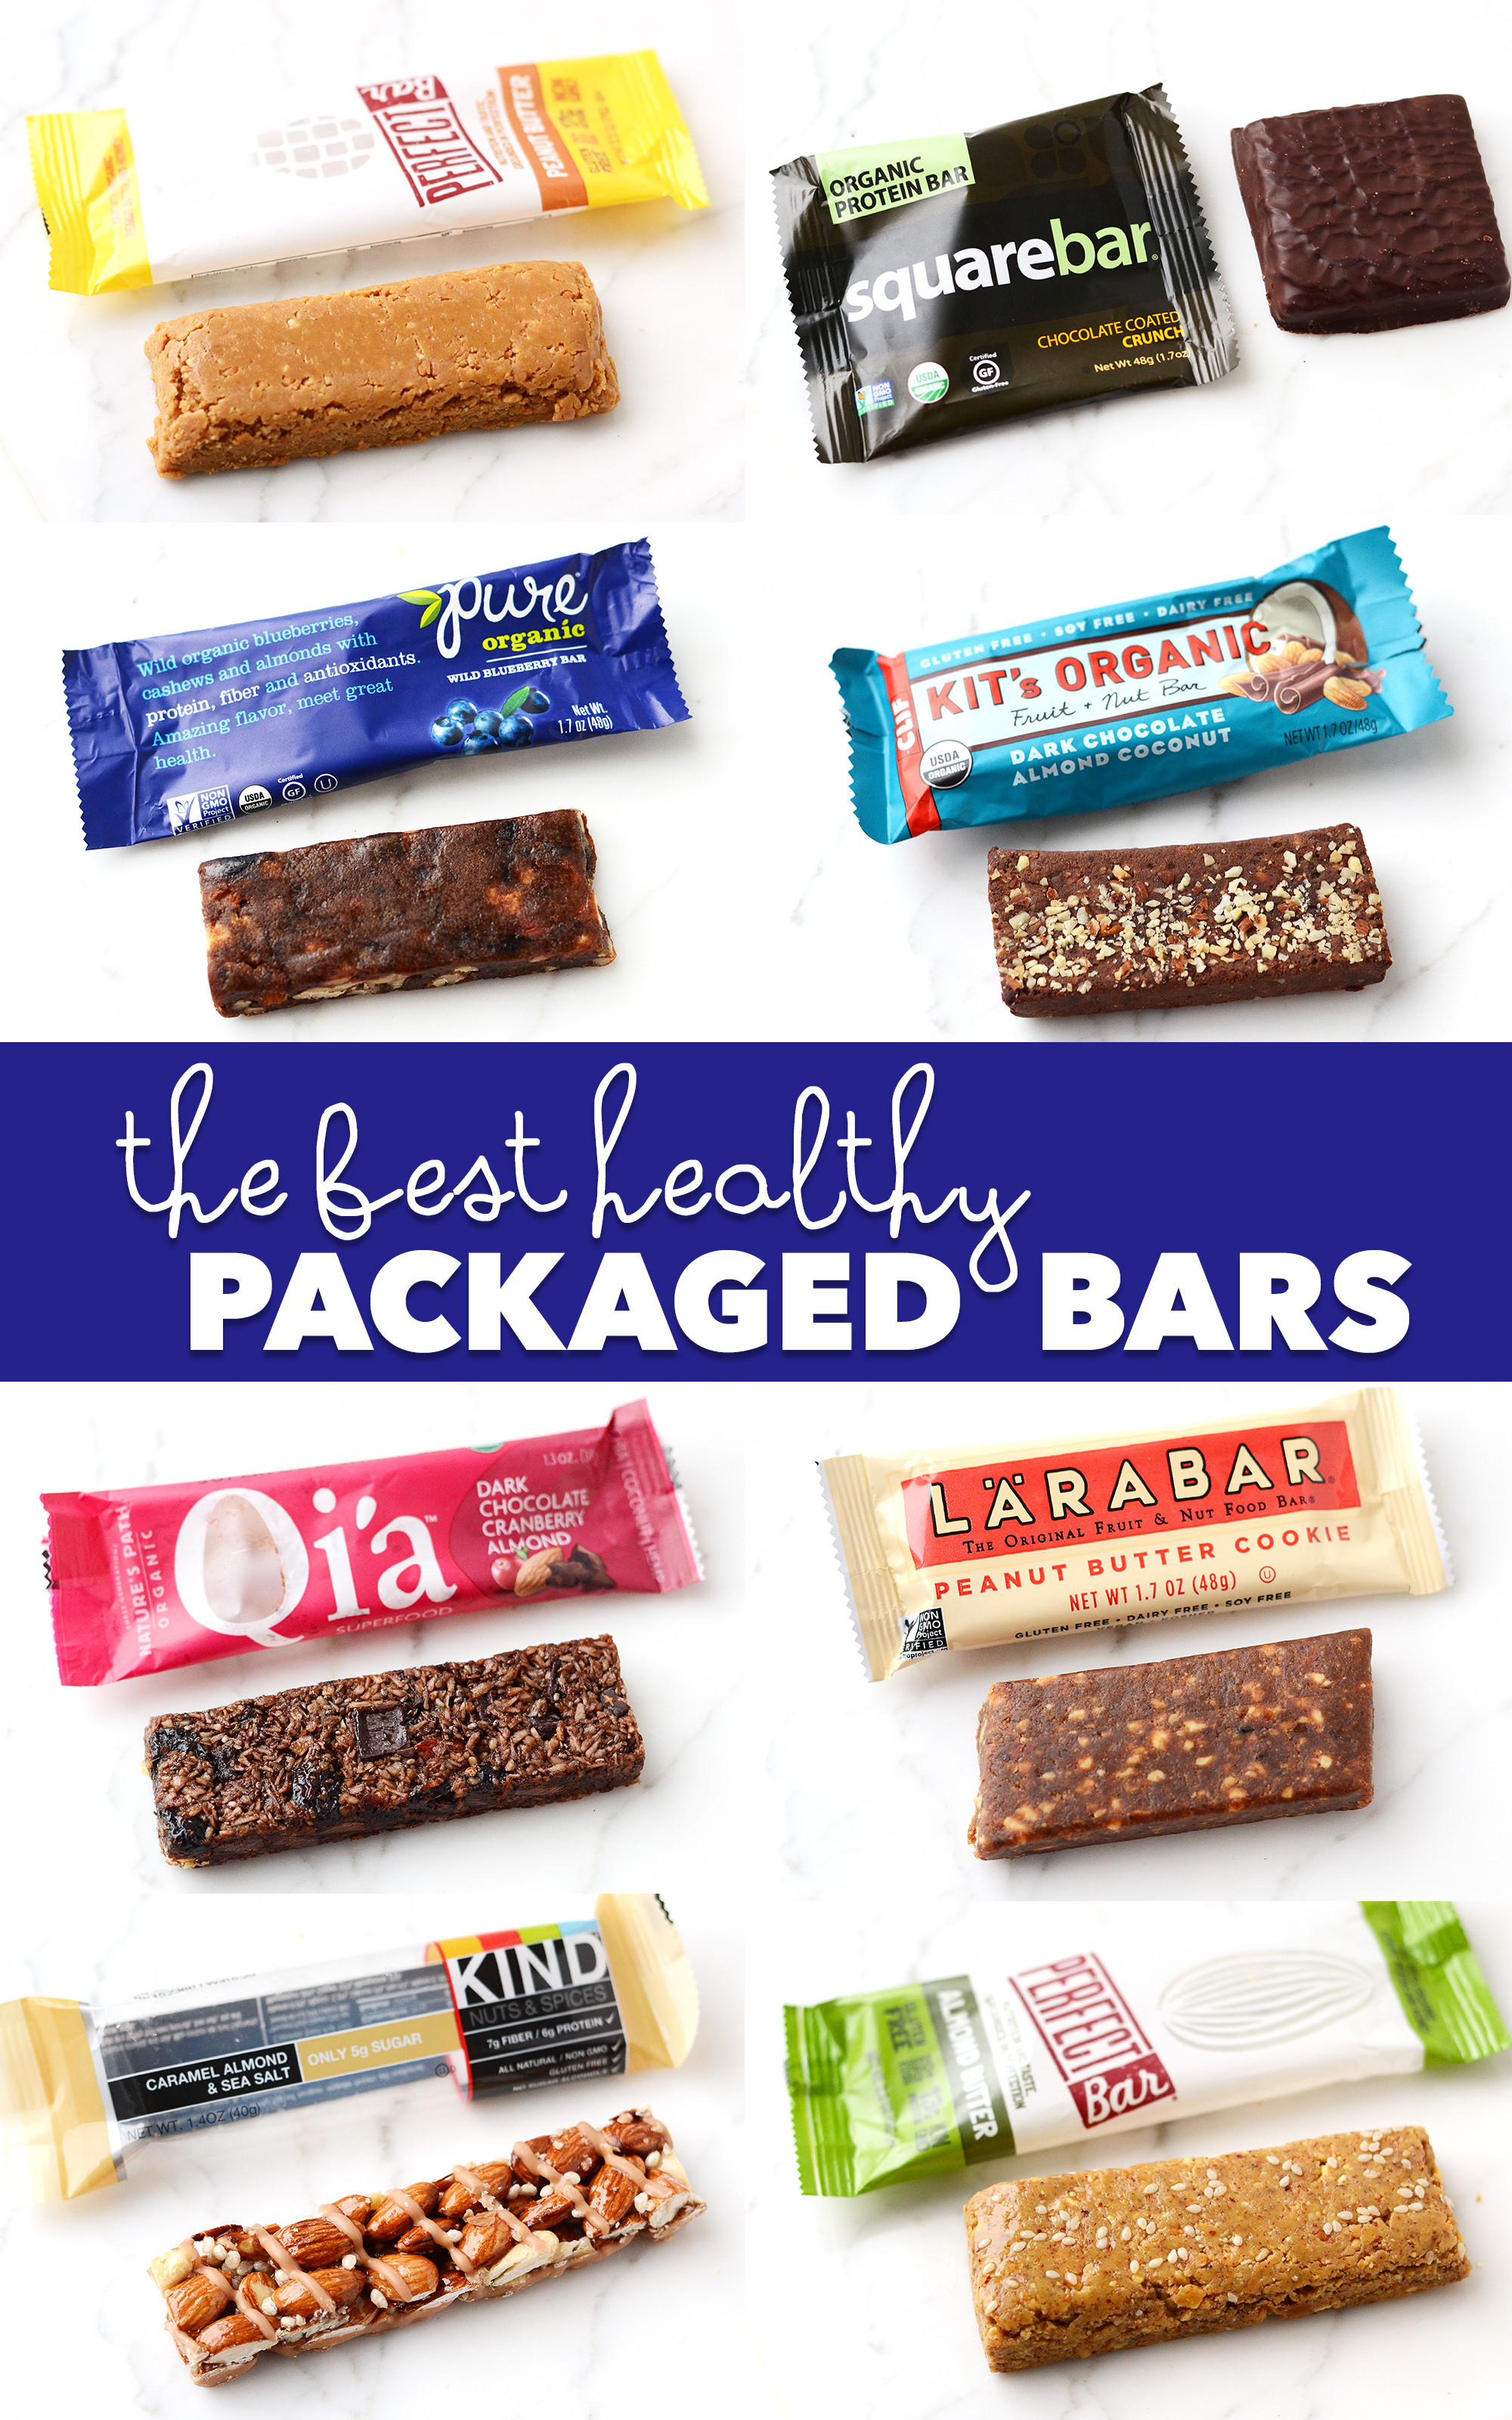 Healthy Packaged Snacks the 20 Best Ideas for the 7 Best Healthy Packaged Bars